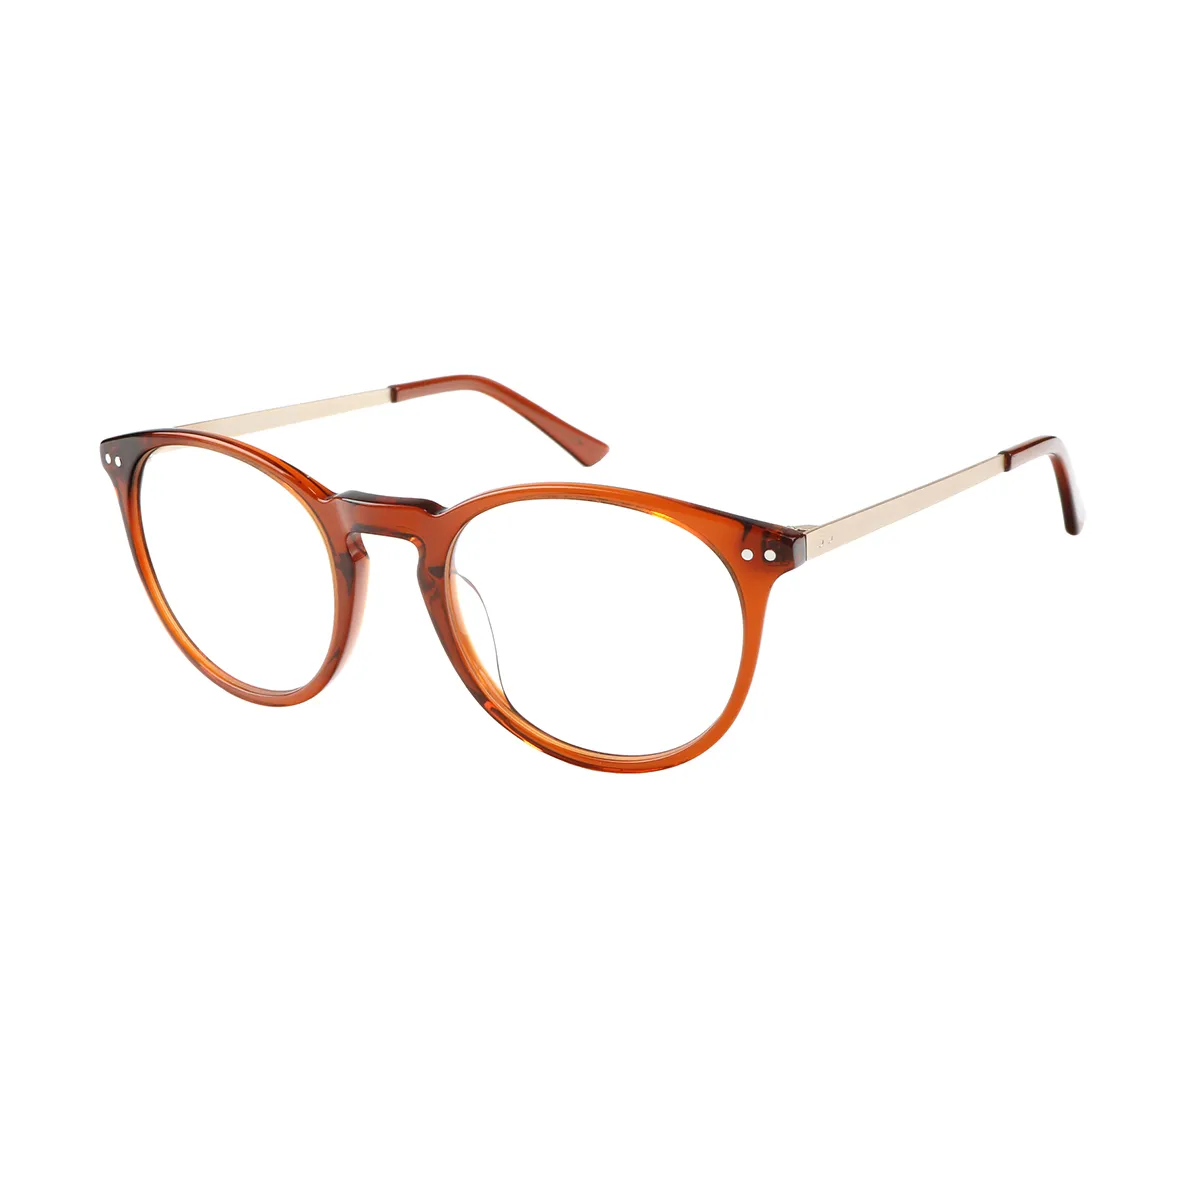 Copeland - Round Brown Glasses for Women - EFE